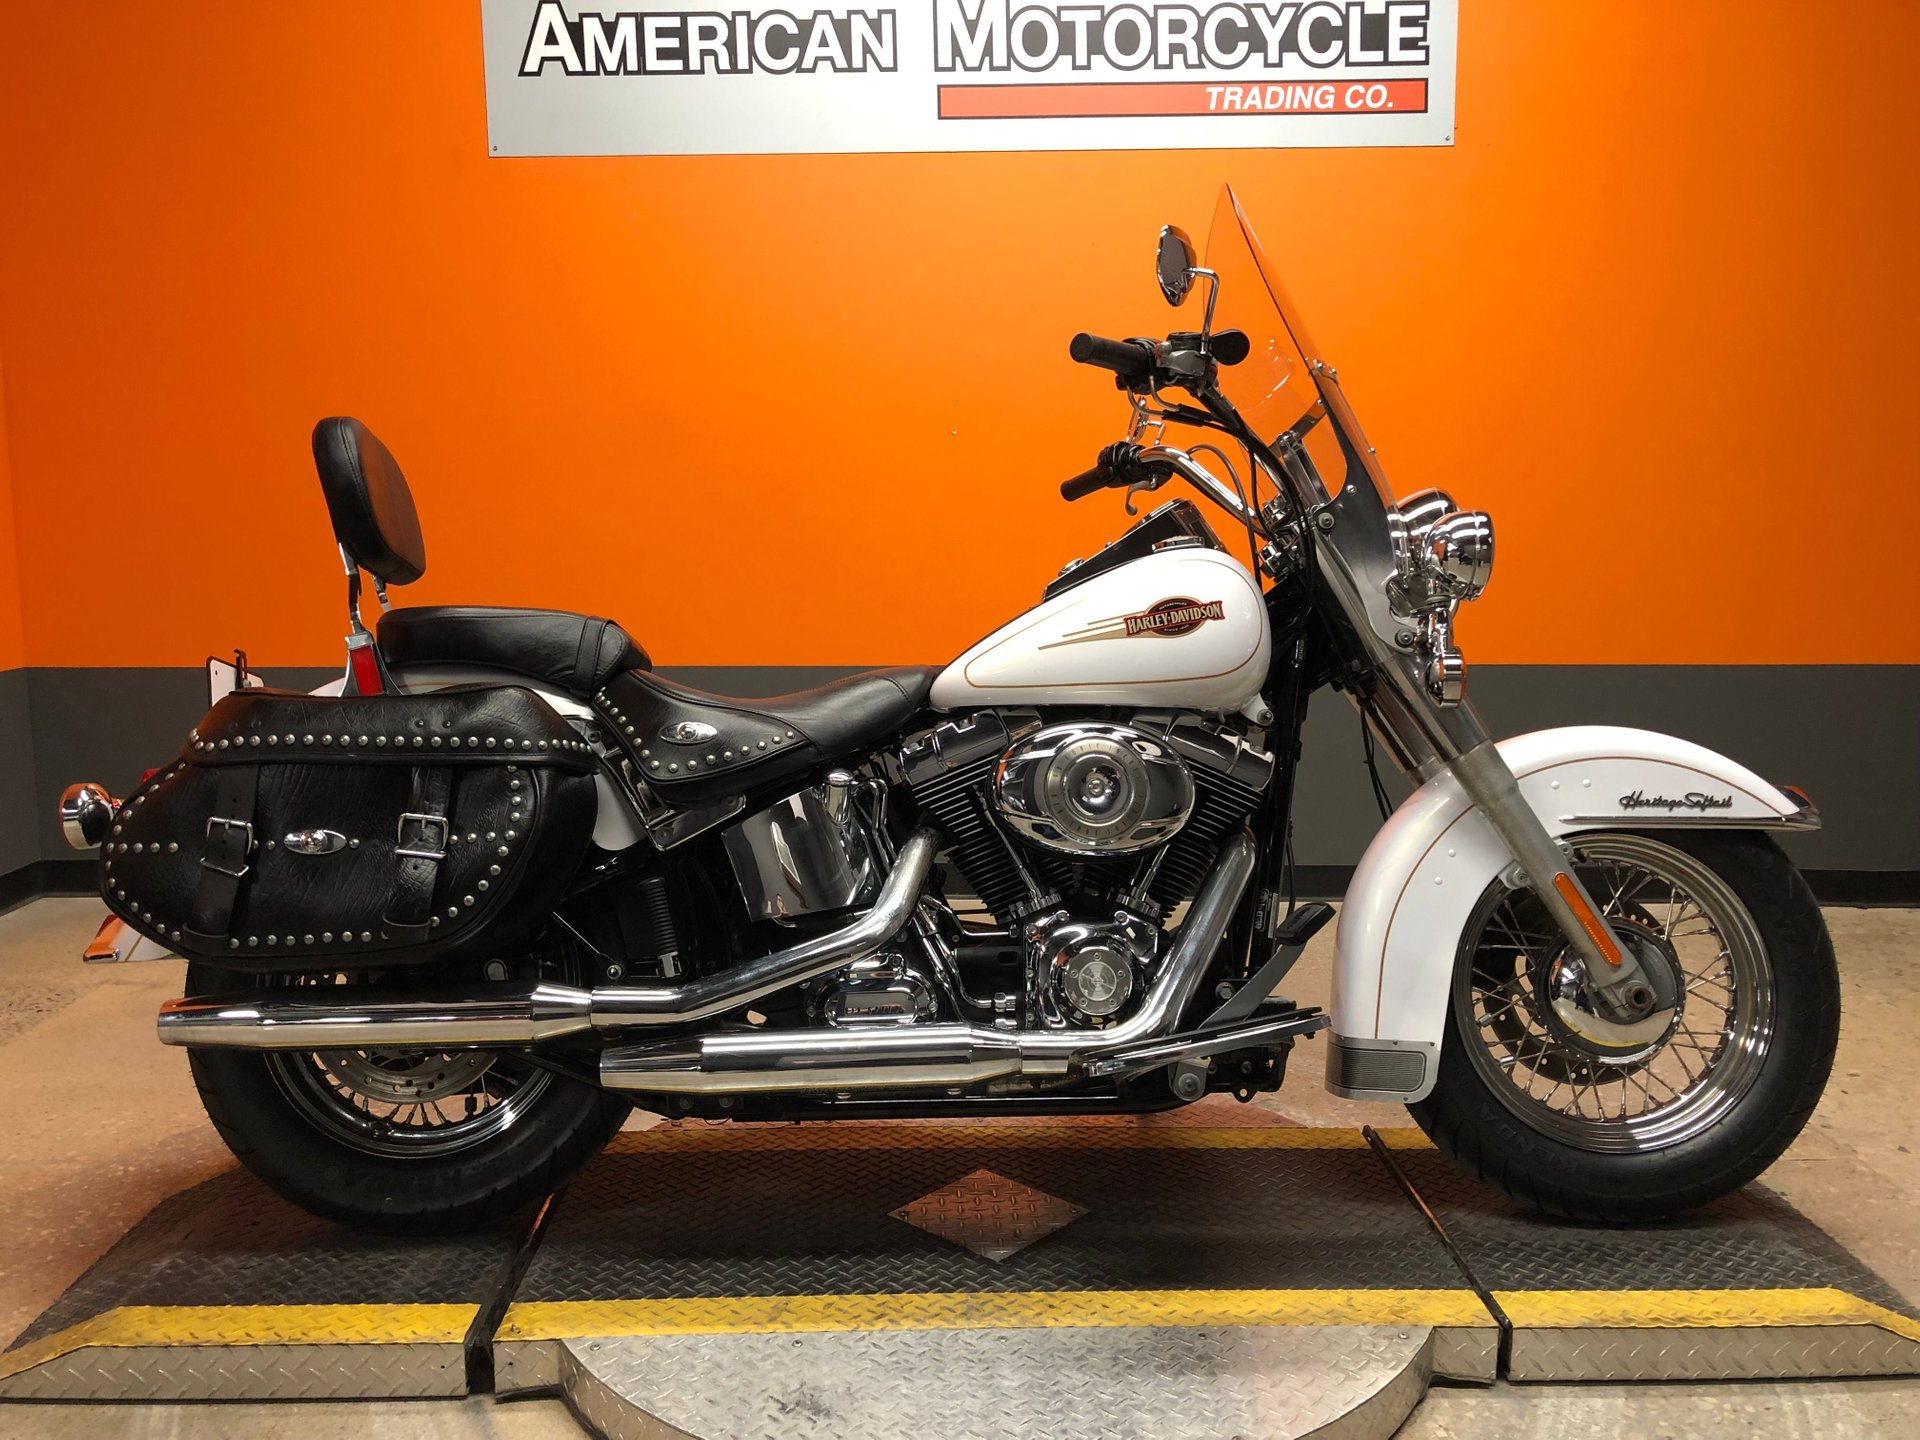 2008 harley davidson heritage softail classic value investing